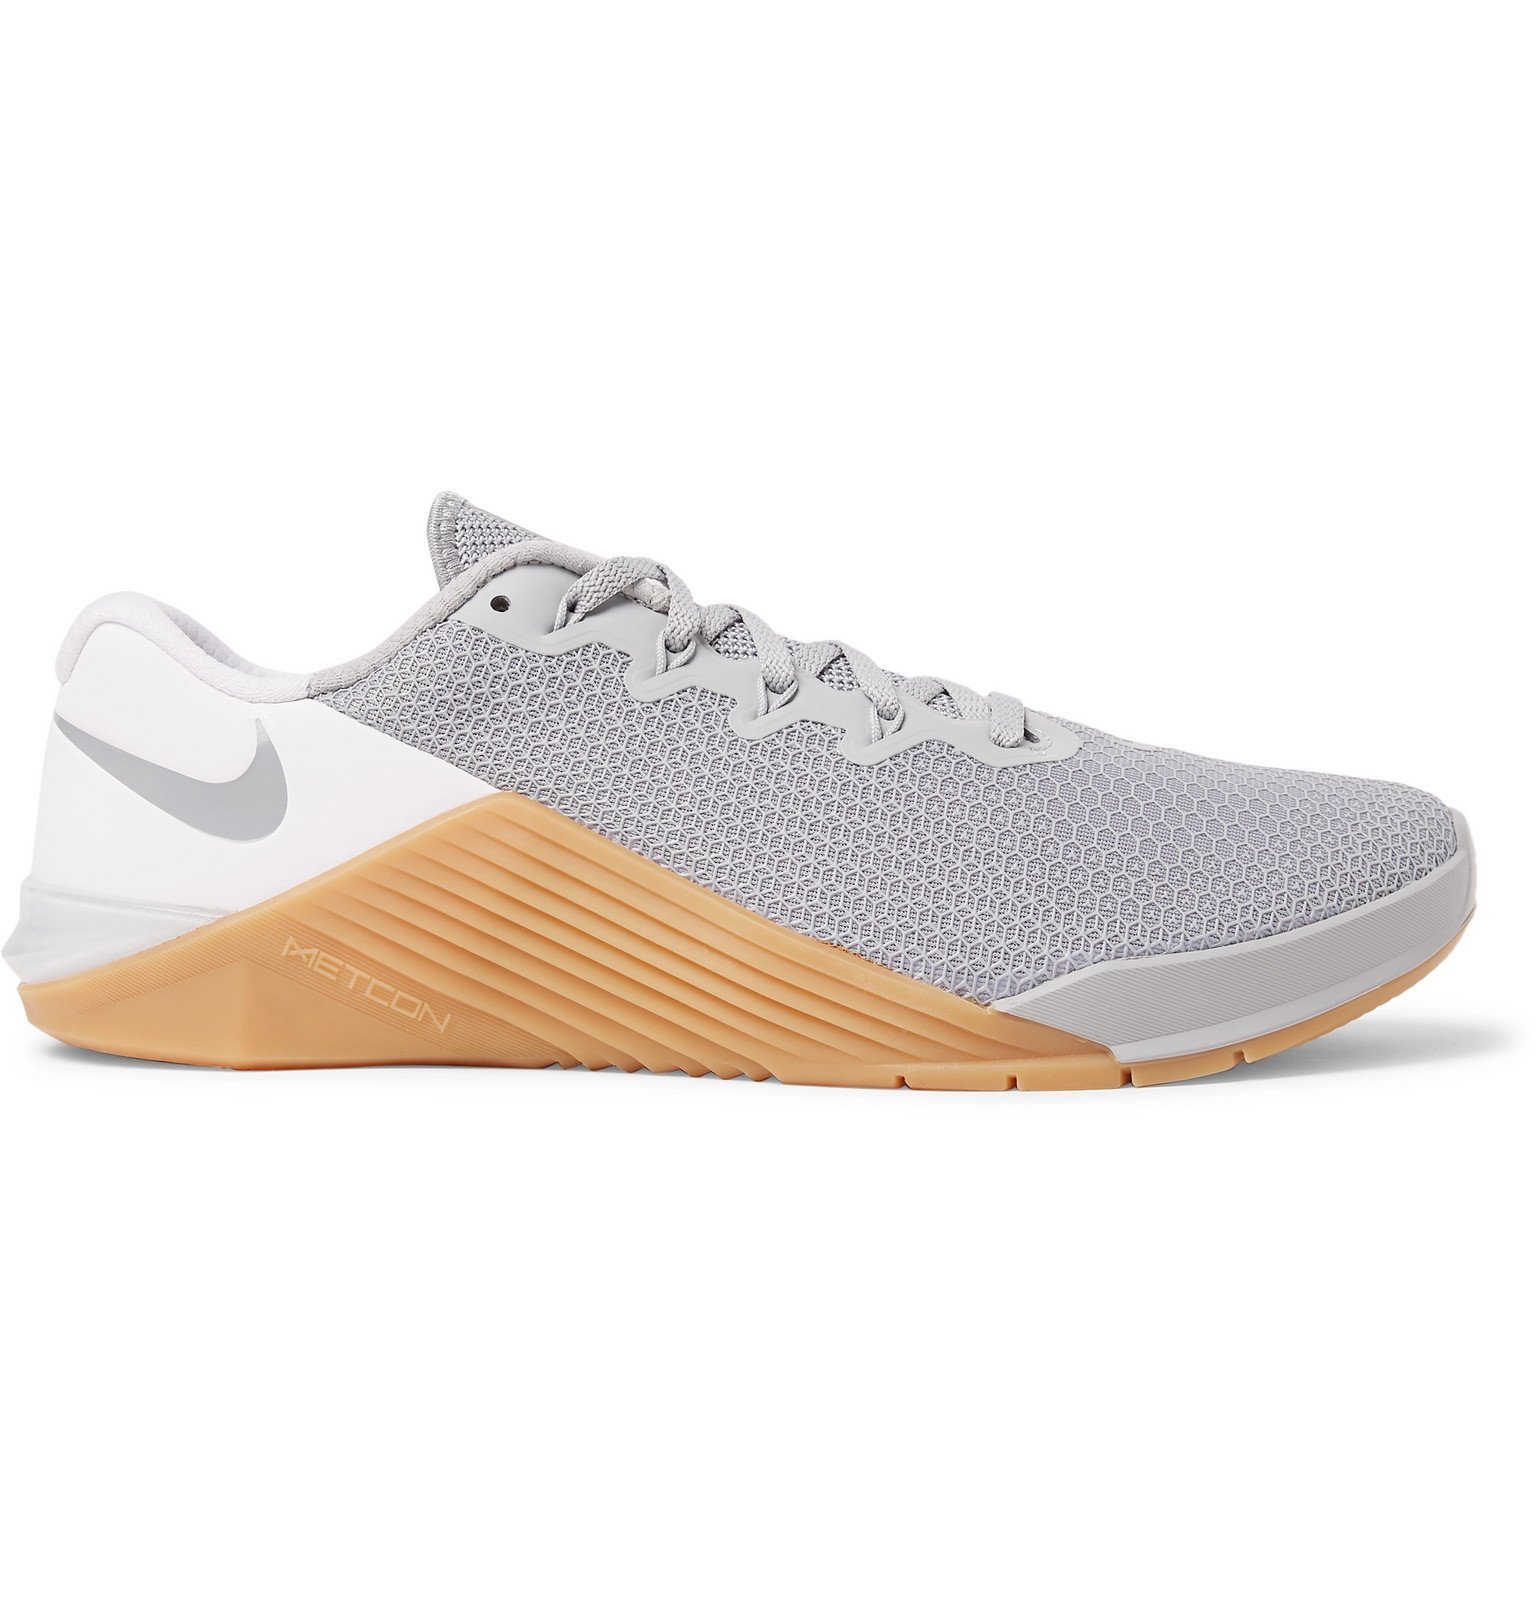 Nike Training - Metcon 5 Rubber-Trimmed Mesh Sneakers - Gray Nike Training